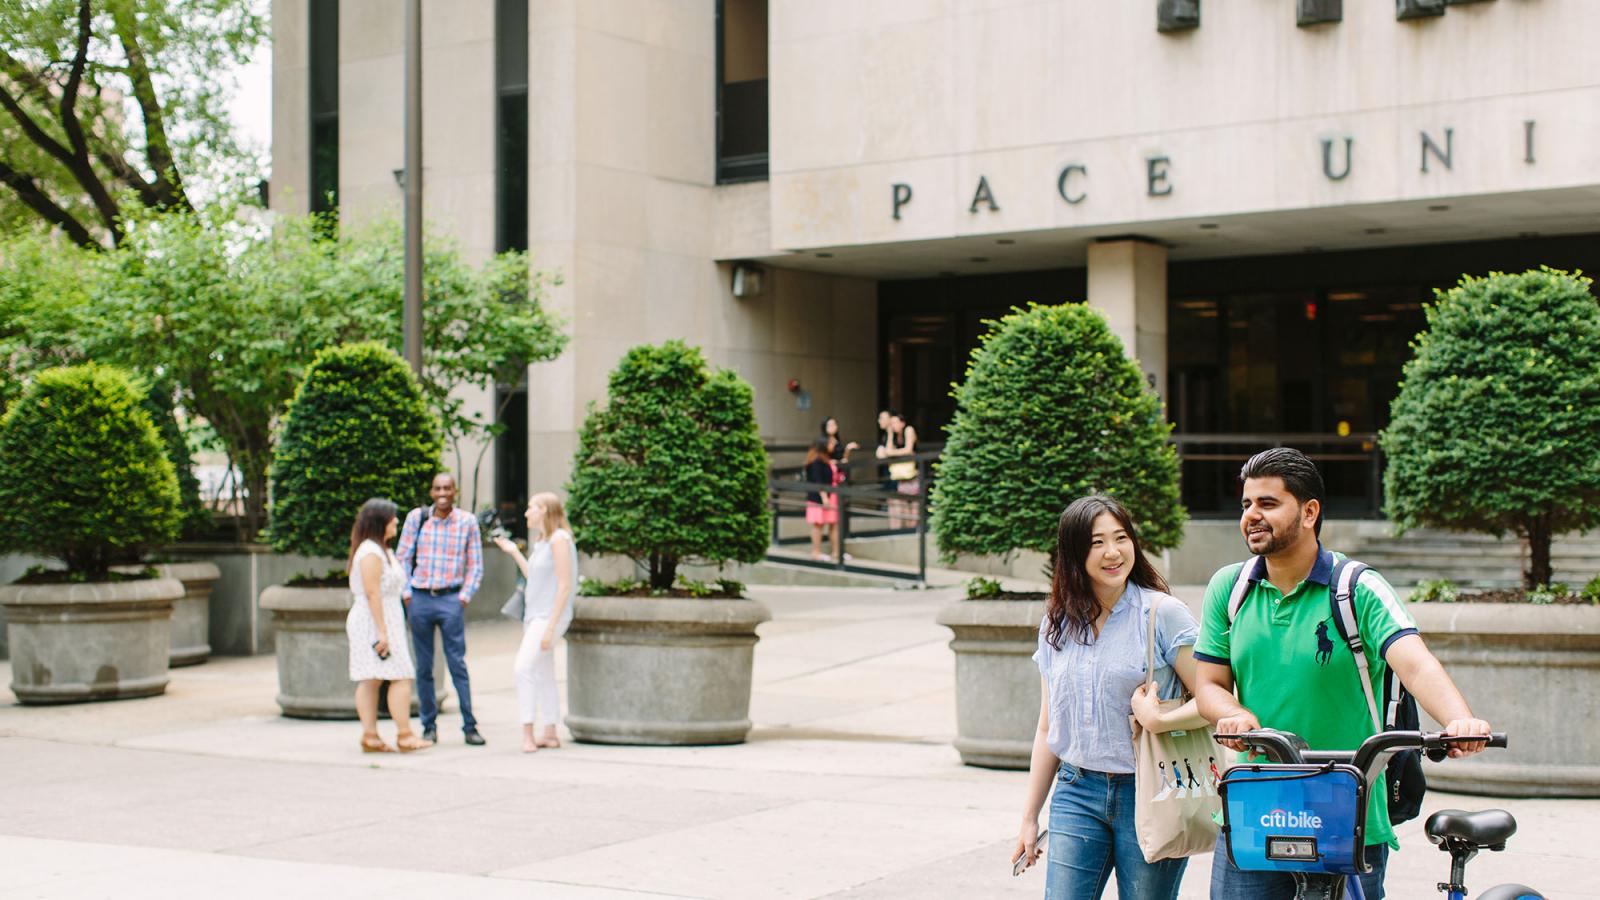 Pace University students walking in front of 1 Pace Plaza in NYC.